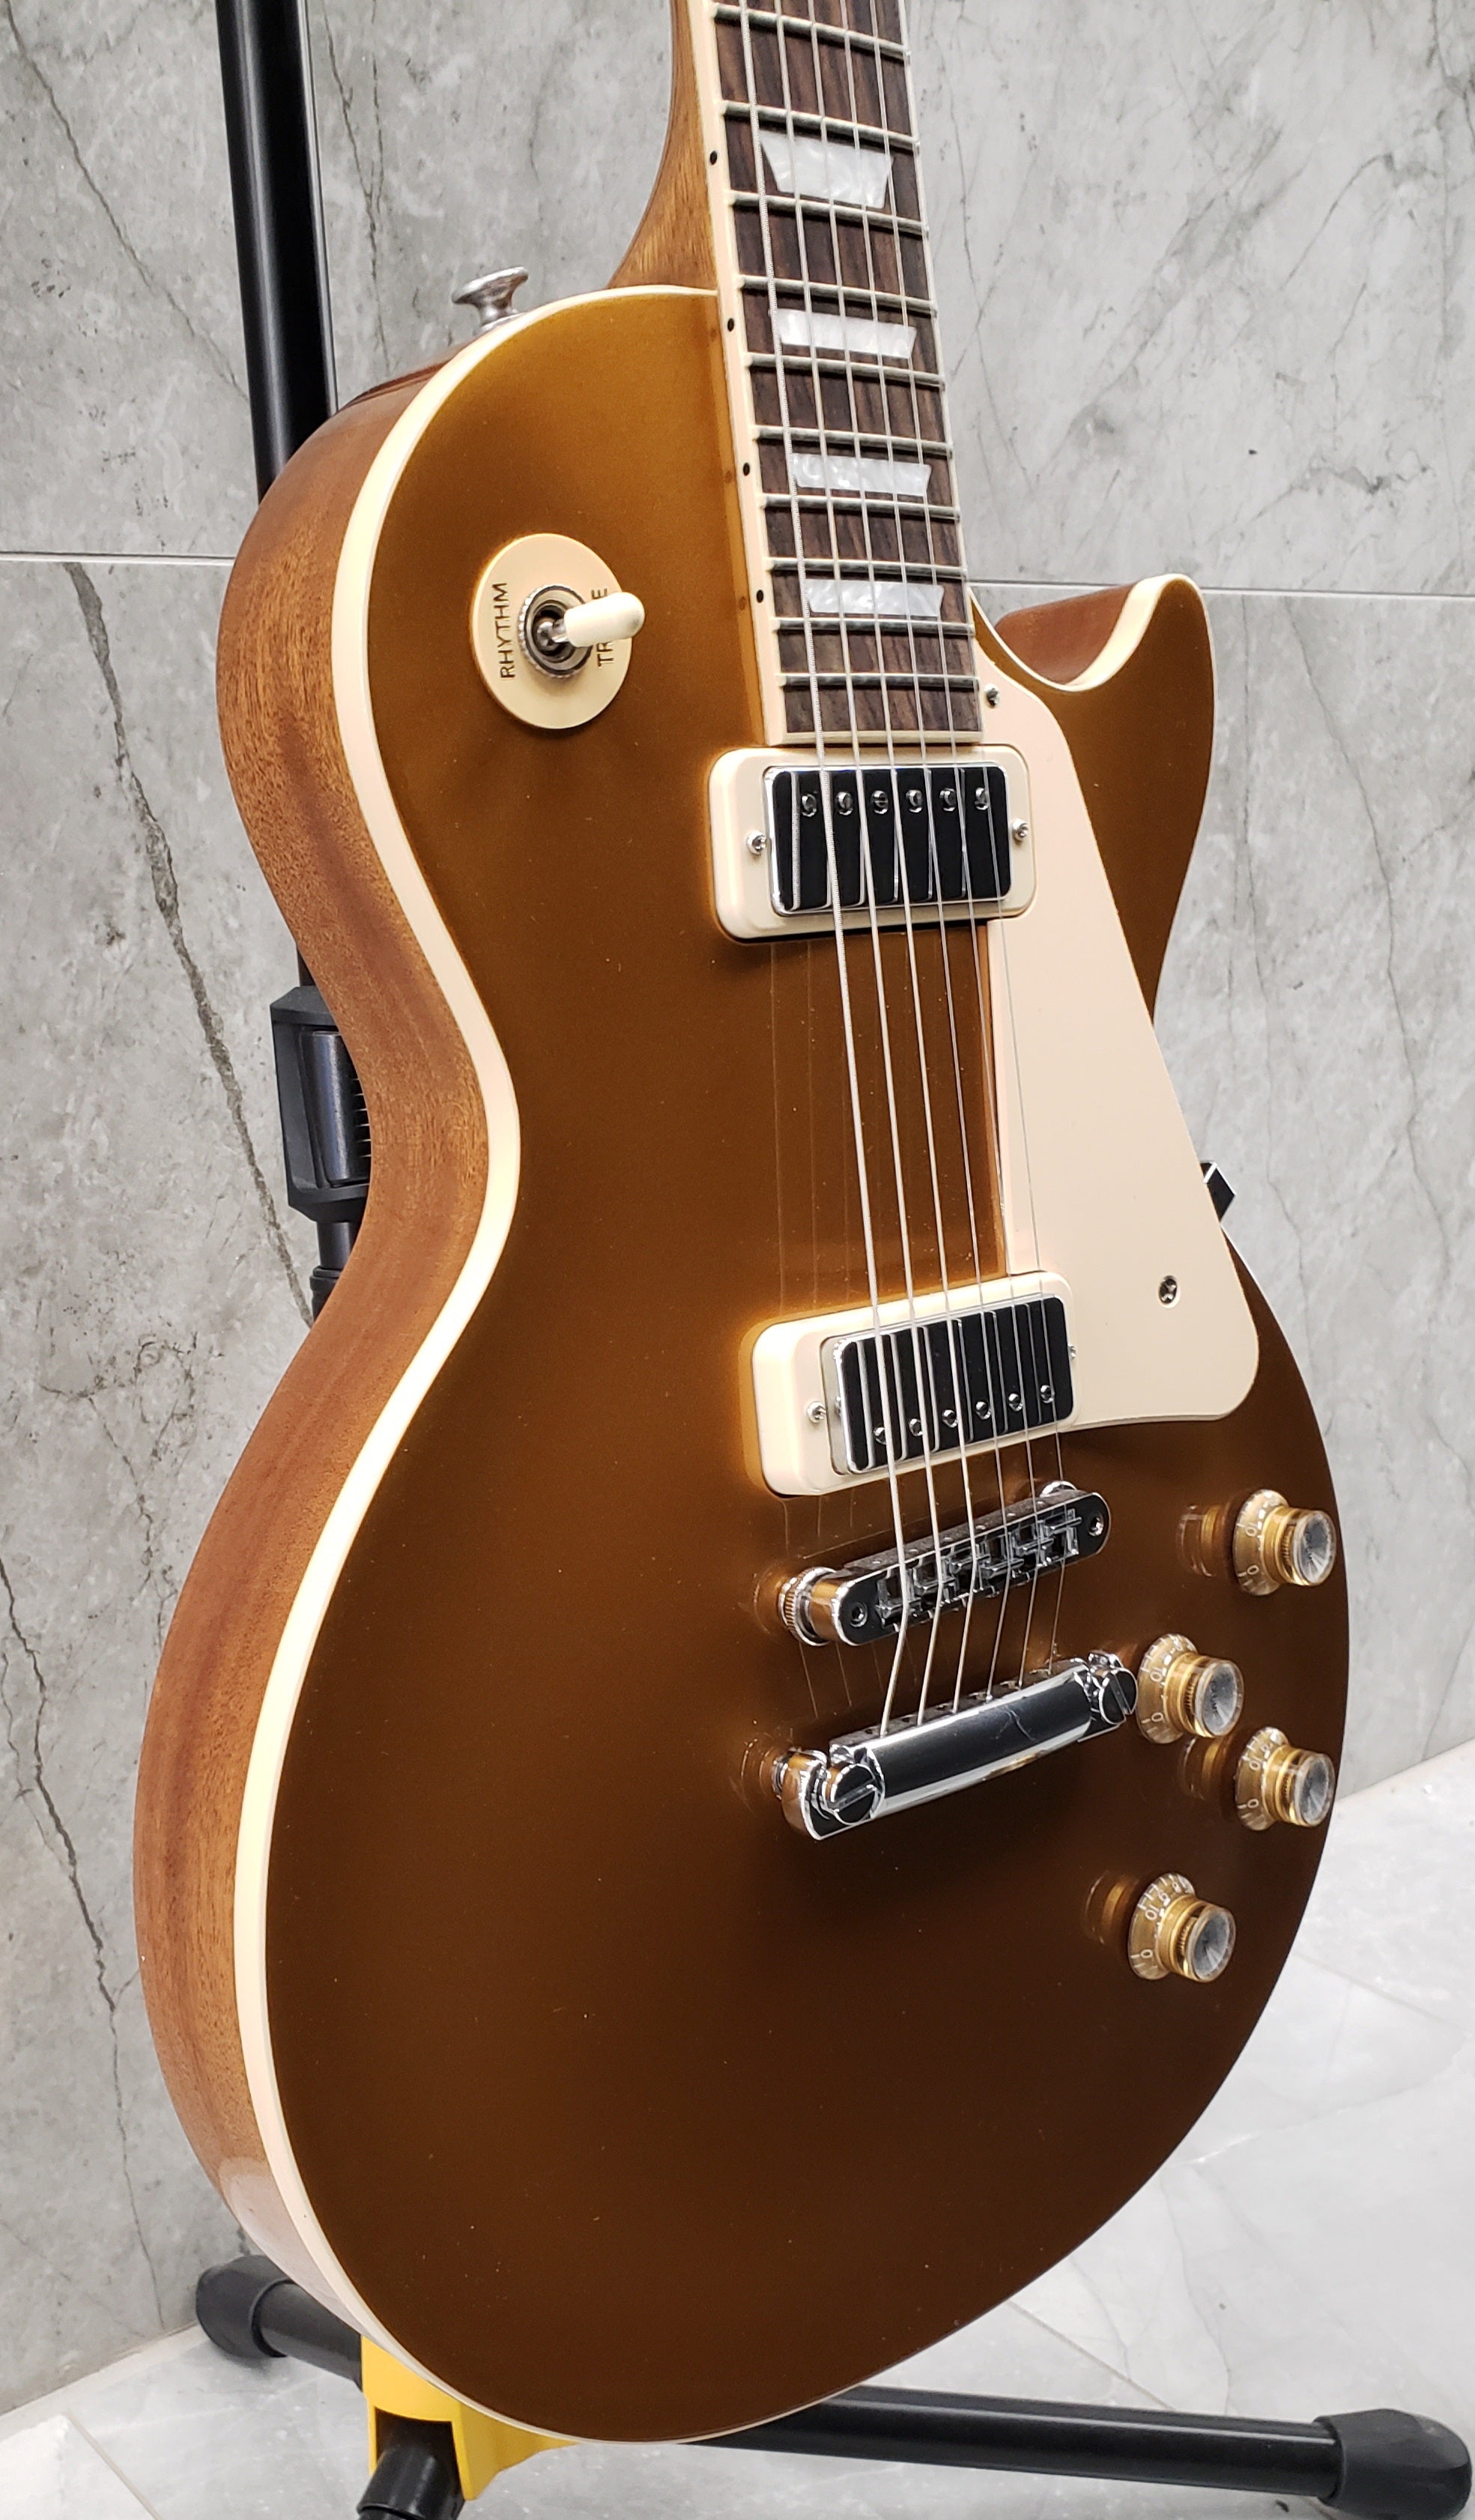 Gibson Les Paul 70s Deluxe - Gold Top LPDX00GTCH